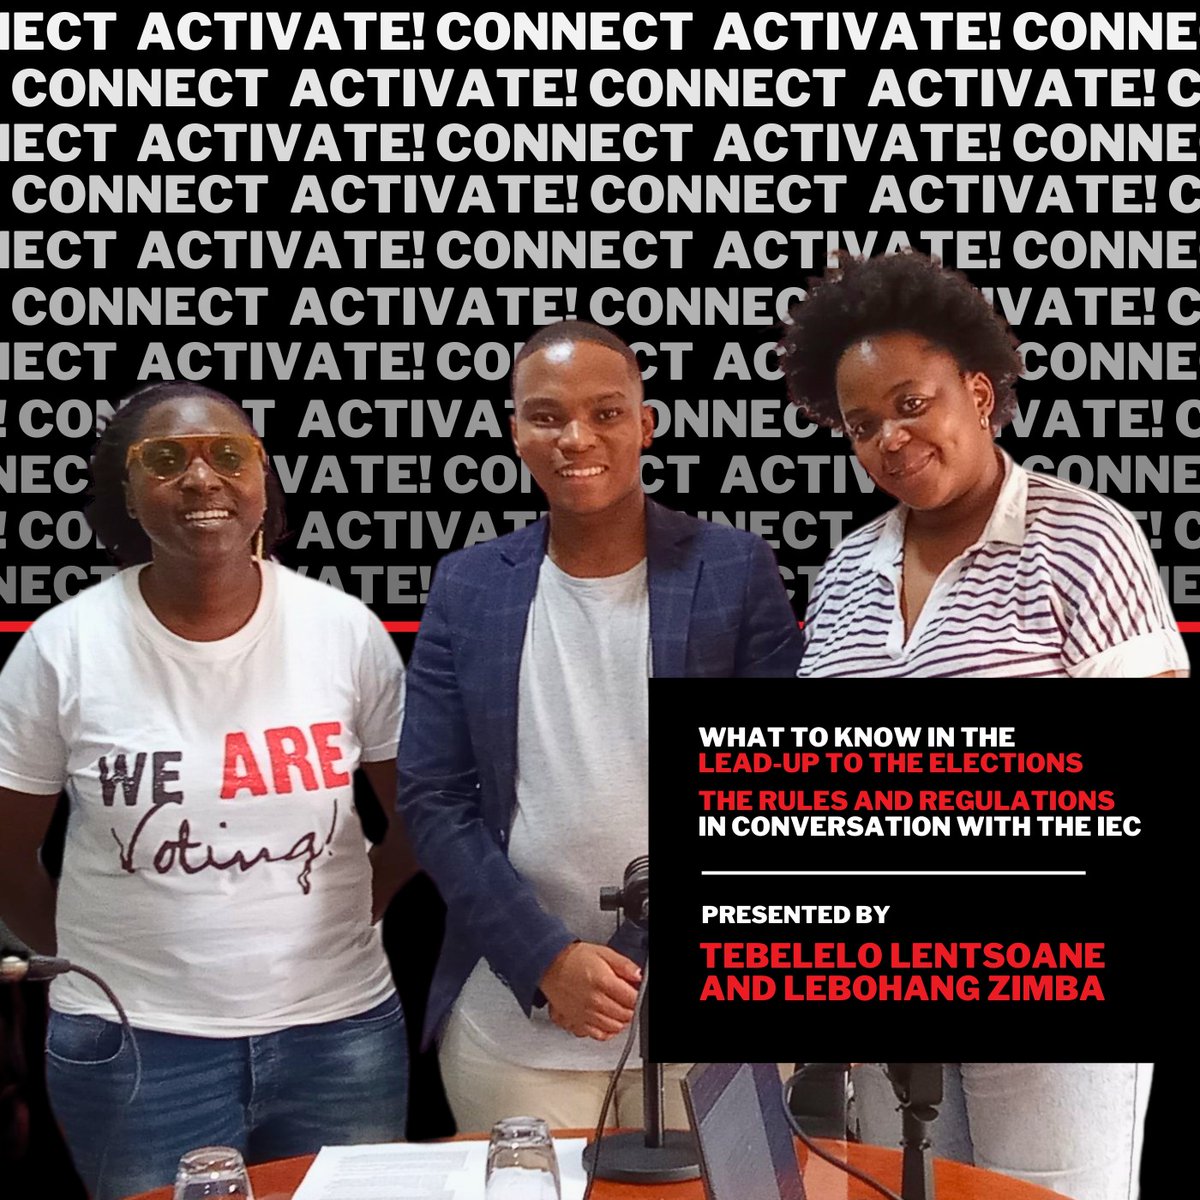 🎙️Out now on Spotify and Apple podcast, episode 3 of the elections podcast series in conversation with Linda Manetsi from @IECSouthAfrica . An informed voter is an empowered voter . #Wearevoting 🫡🇿🇦 🔗open.spotify.com/episode/0XtVNY… 🔗podcasts.apple.com/za/podcast/a-c… 🎙️activateleadership.co.za/radio/